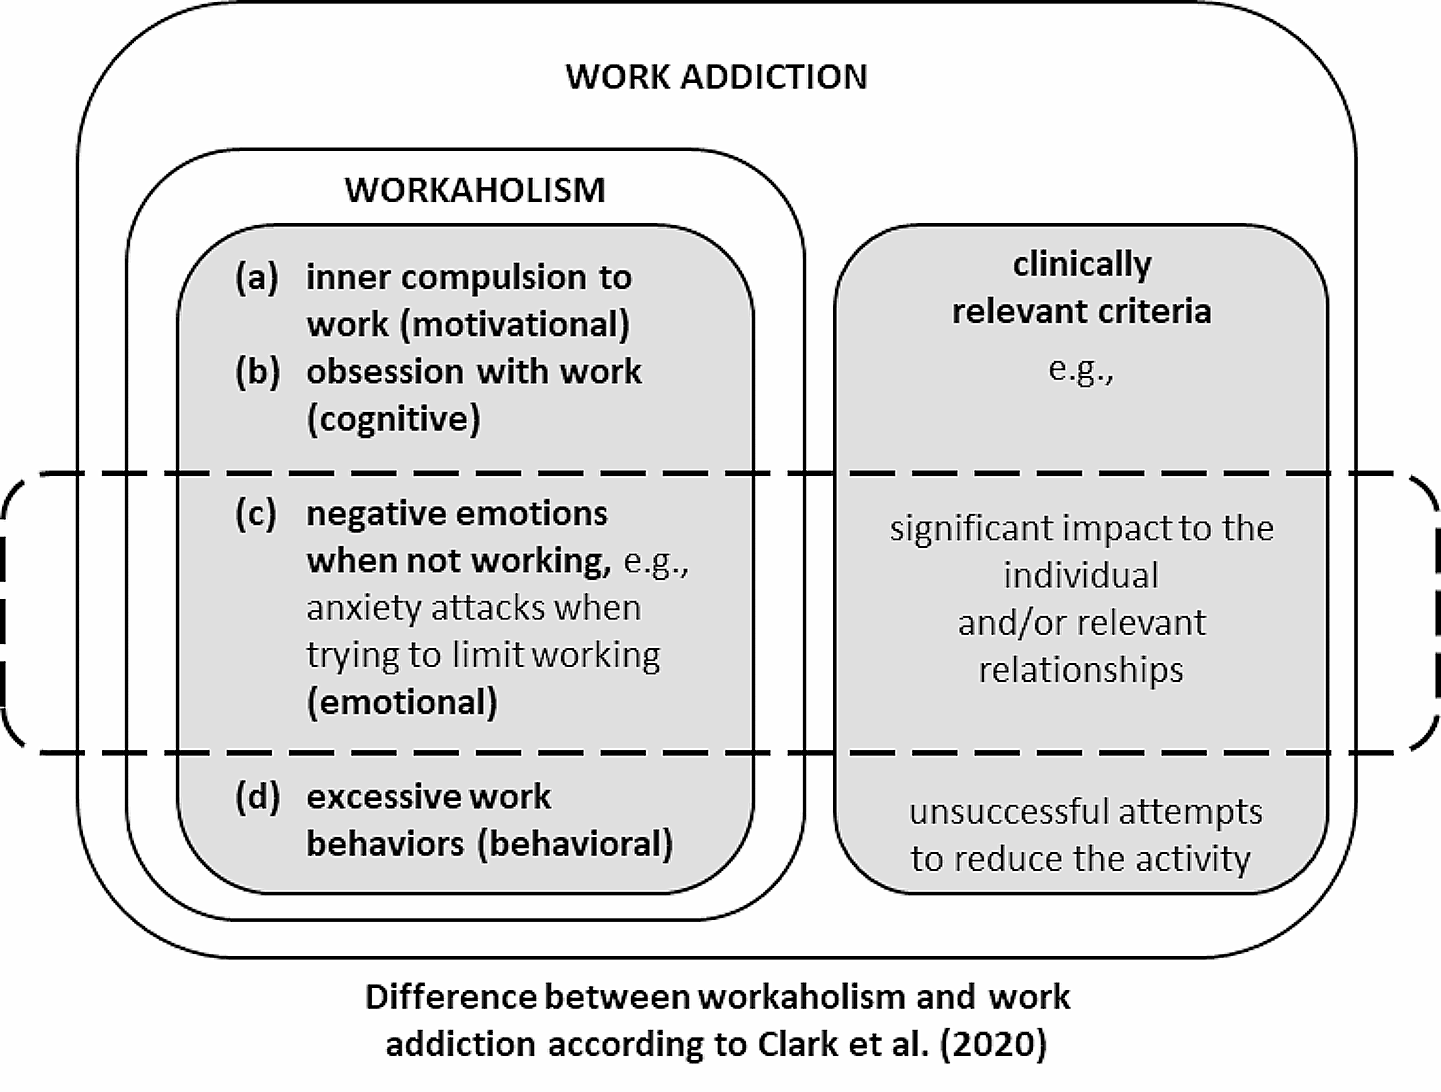 Work Addiction and Workaholism are Synonymous: An Analysis of the Sources of Confusion (a Commentary on Morkevičiūtė and Endriulaitienė)